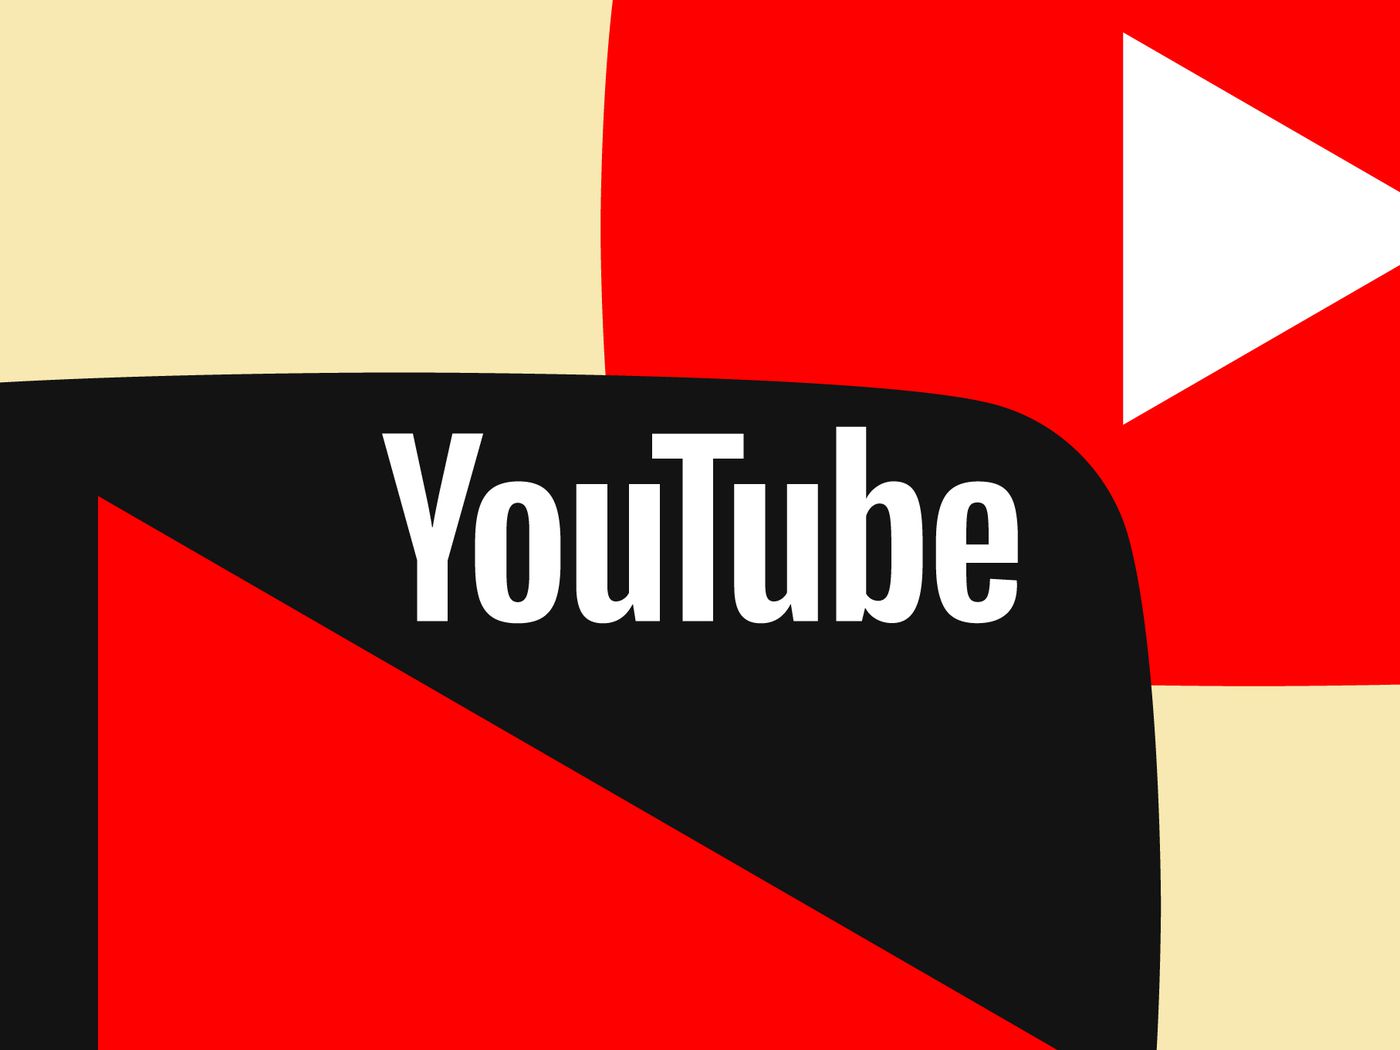 YouTube Introduces New Disclosure Tool for Synthetic Media